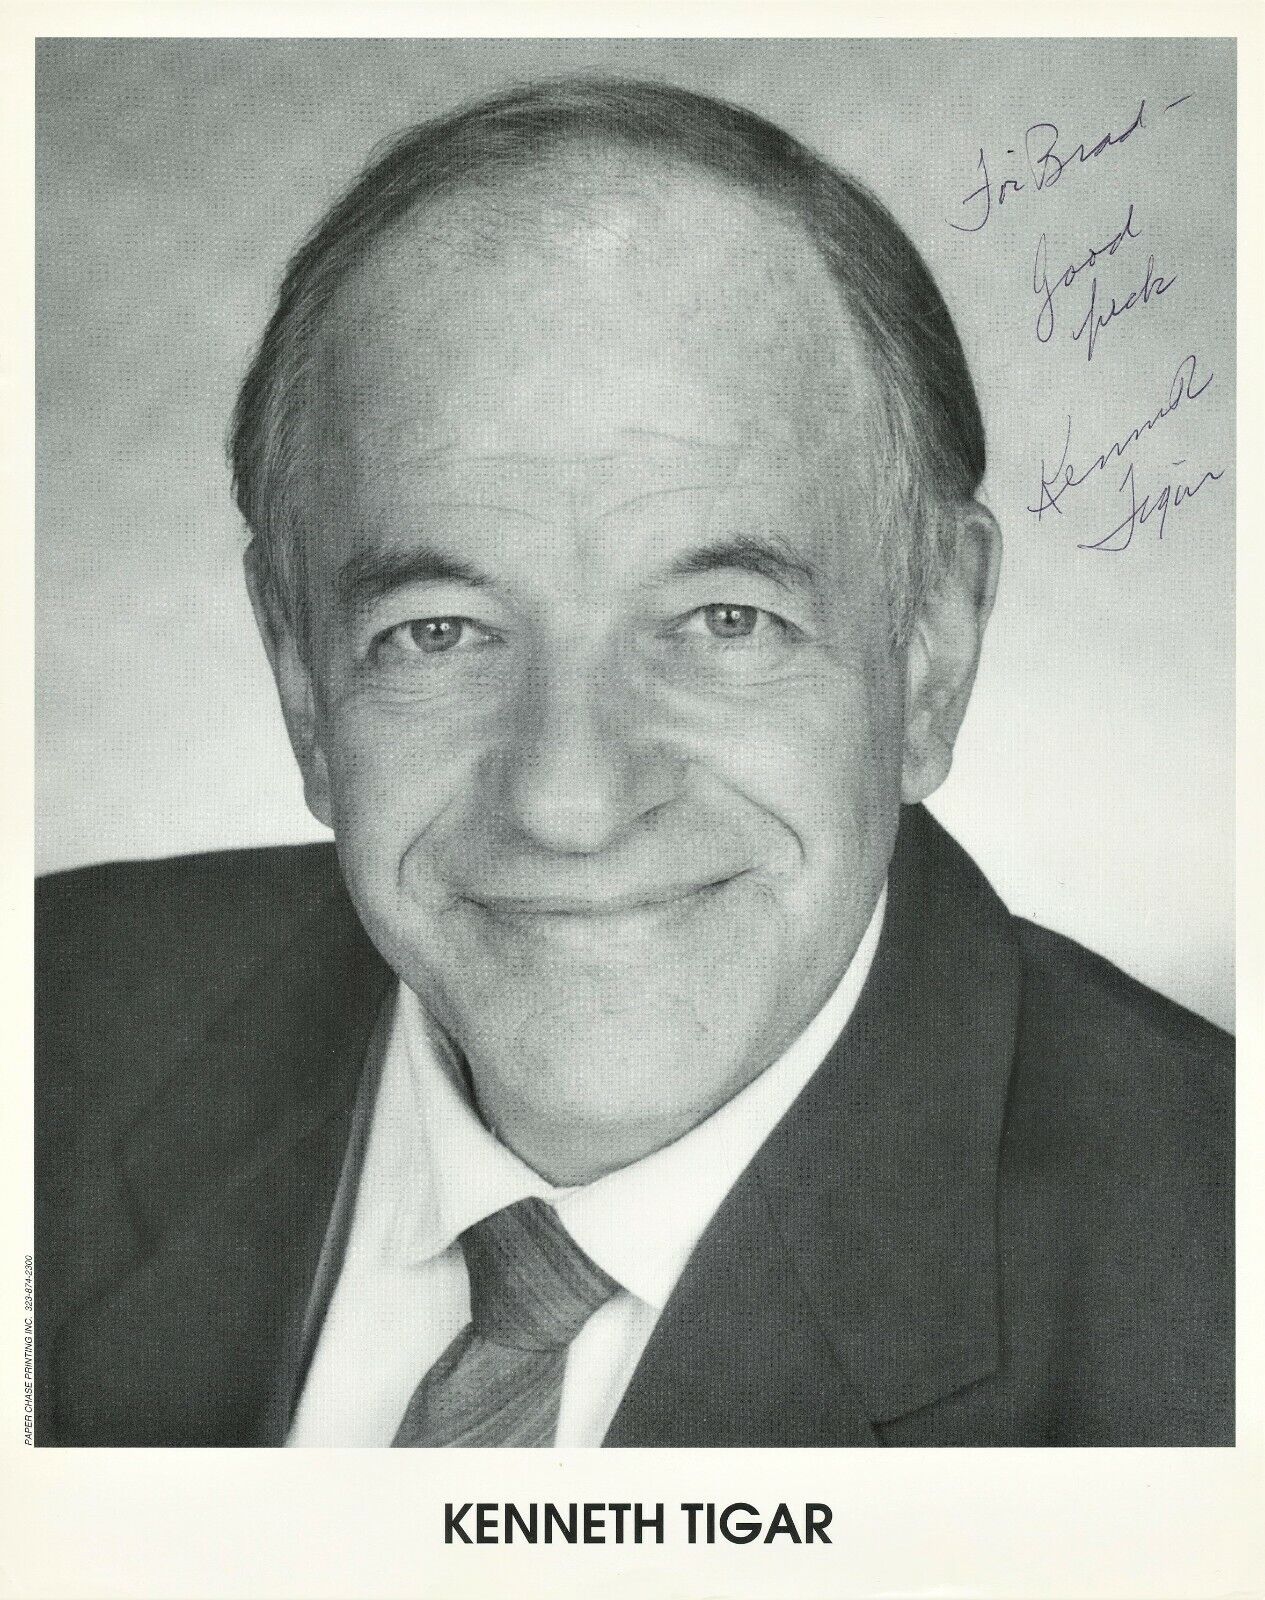 KENNETH TIGAR Signed Photo Poster painting - Lethal Weapon 2